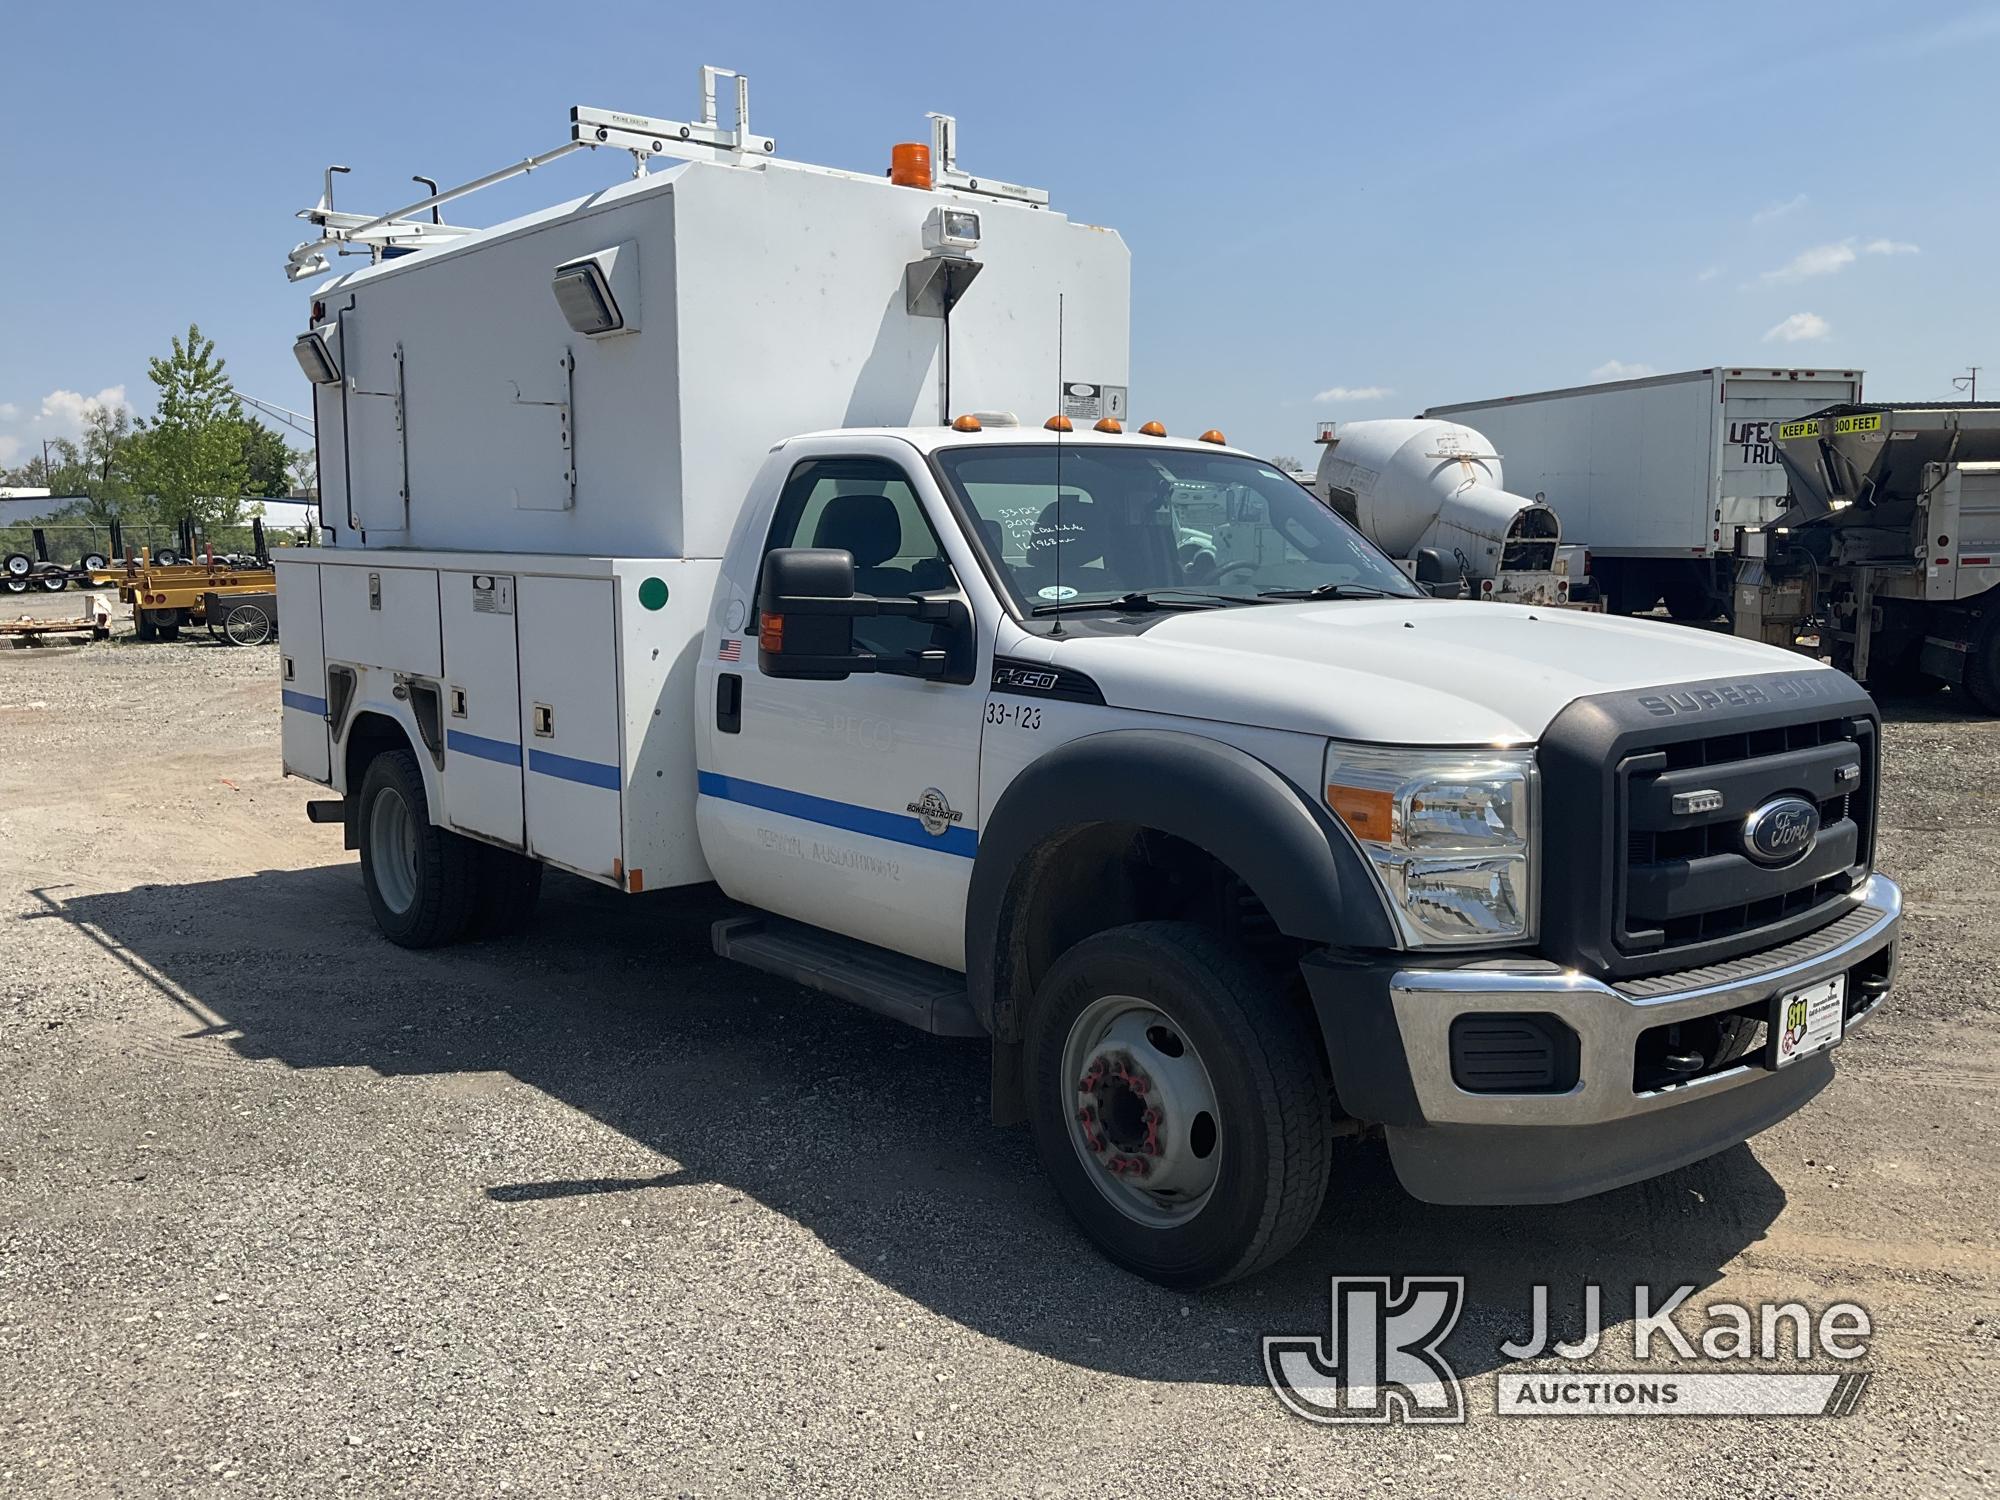 (Plymouth Meeting, PA) 2012 Ford F450 Enclosed Service Truck Runs & Moves, Body & Rust Damage